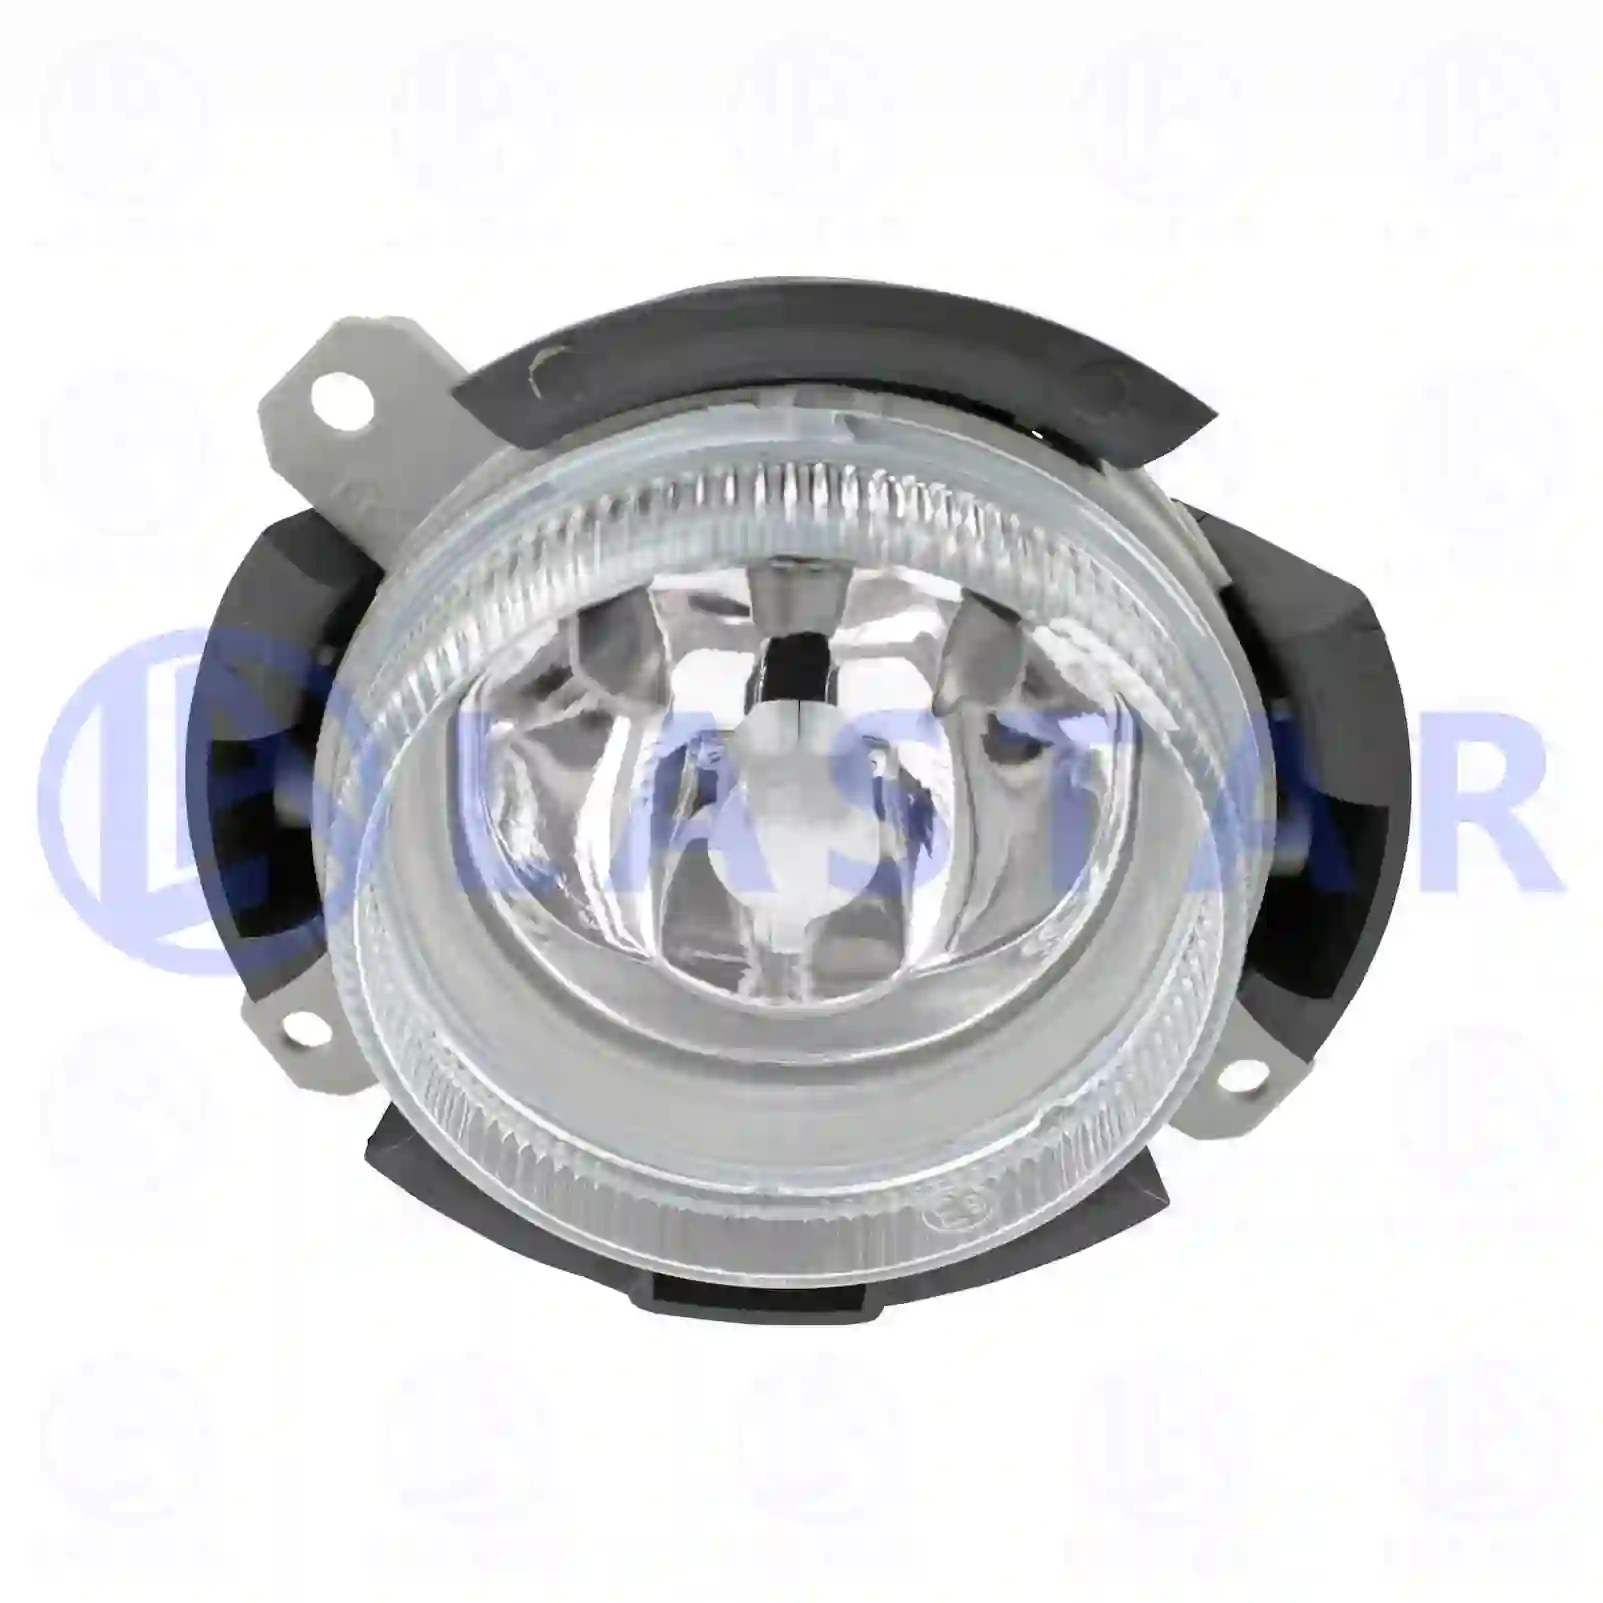 Fog lamp, without bulb, 77710786, 504032145, ZG20434-0008, , , ||  77710786 Lastar Spare Part | Truck Spare Parts, Auotomotive Spare Parts Fog lamp, without bulb, 77710786, 504032145, ZG20434-0008, , , ||  77710786 Lastar Spare Part | Truck Spare Parts, Auotomotive Spare Parts